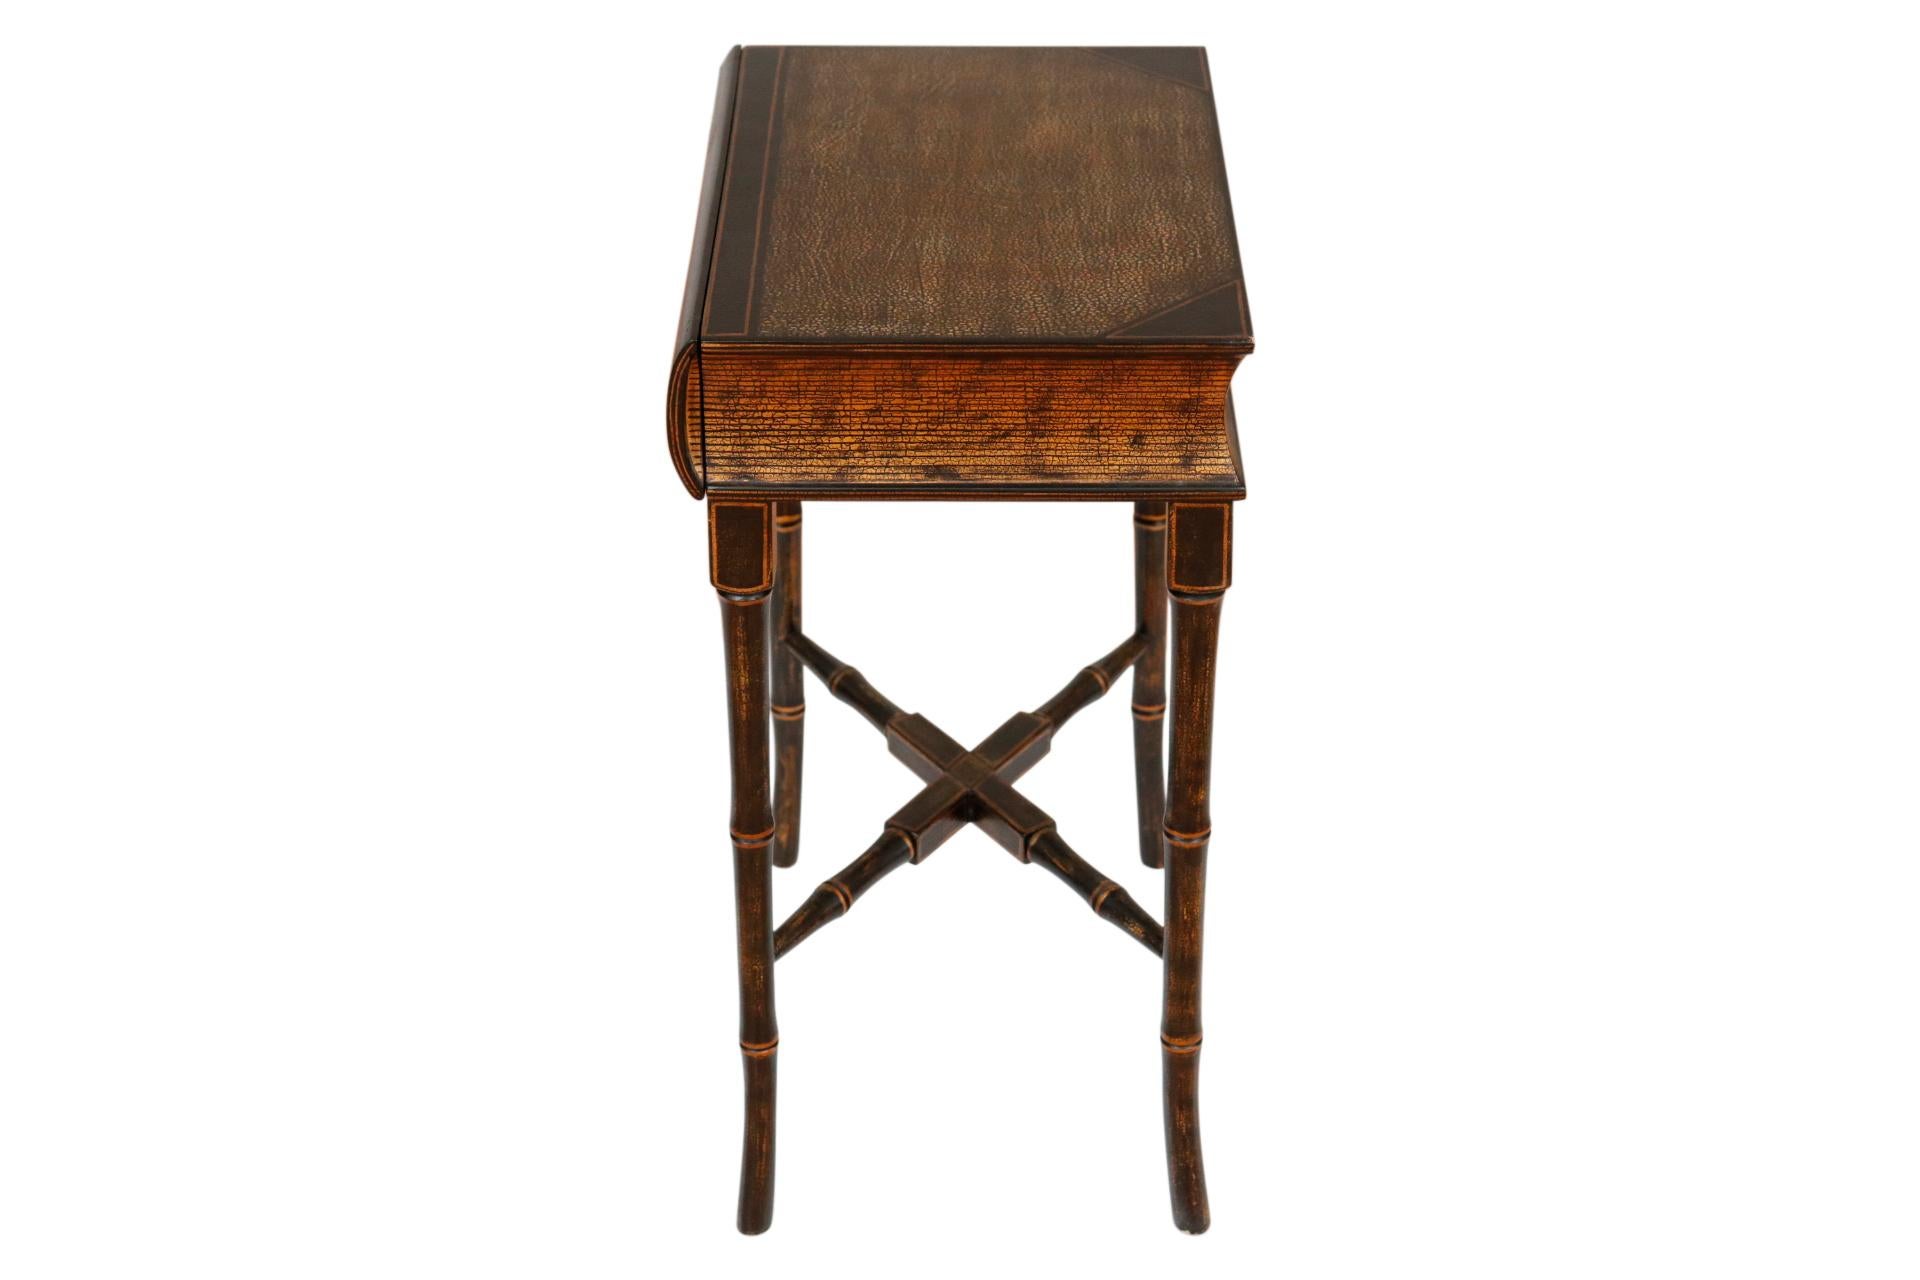 Wood Chinoiserie Book Top Side Table by Harden Furniture